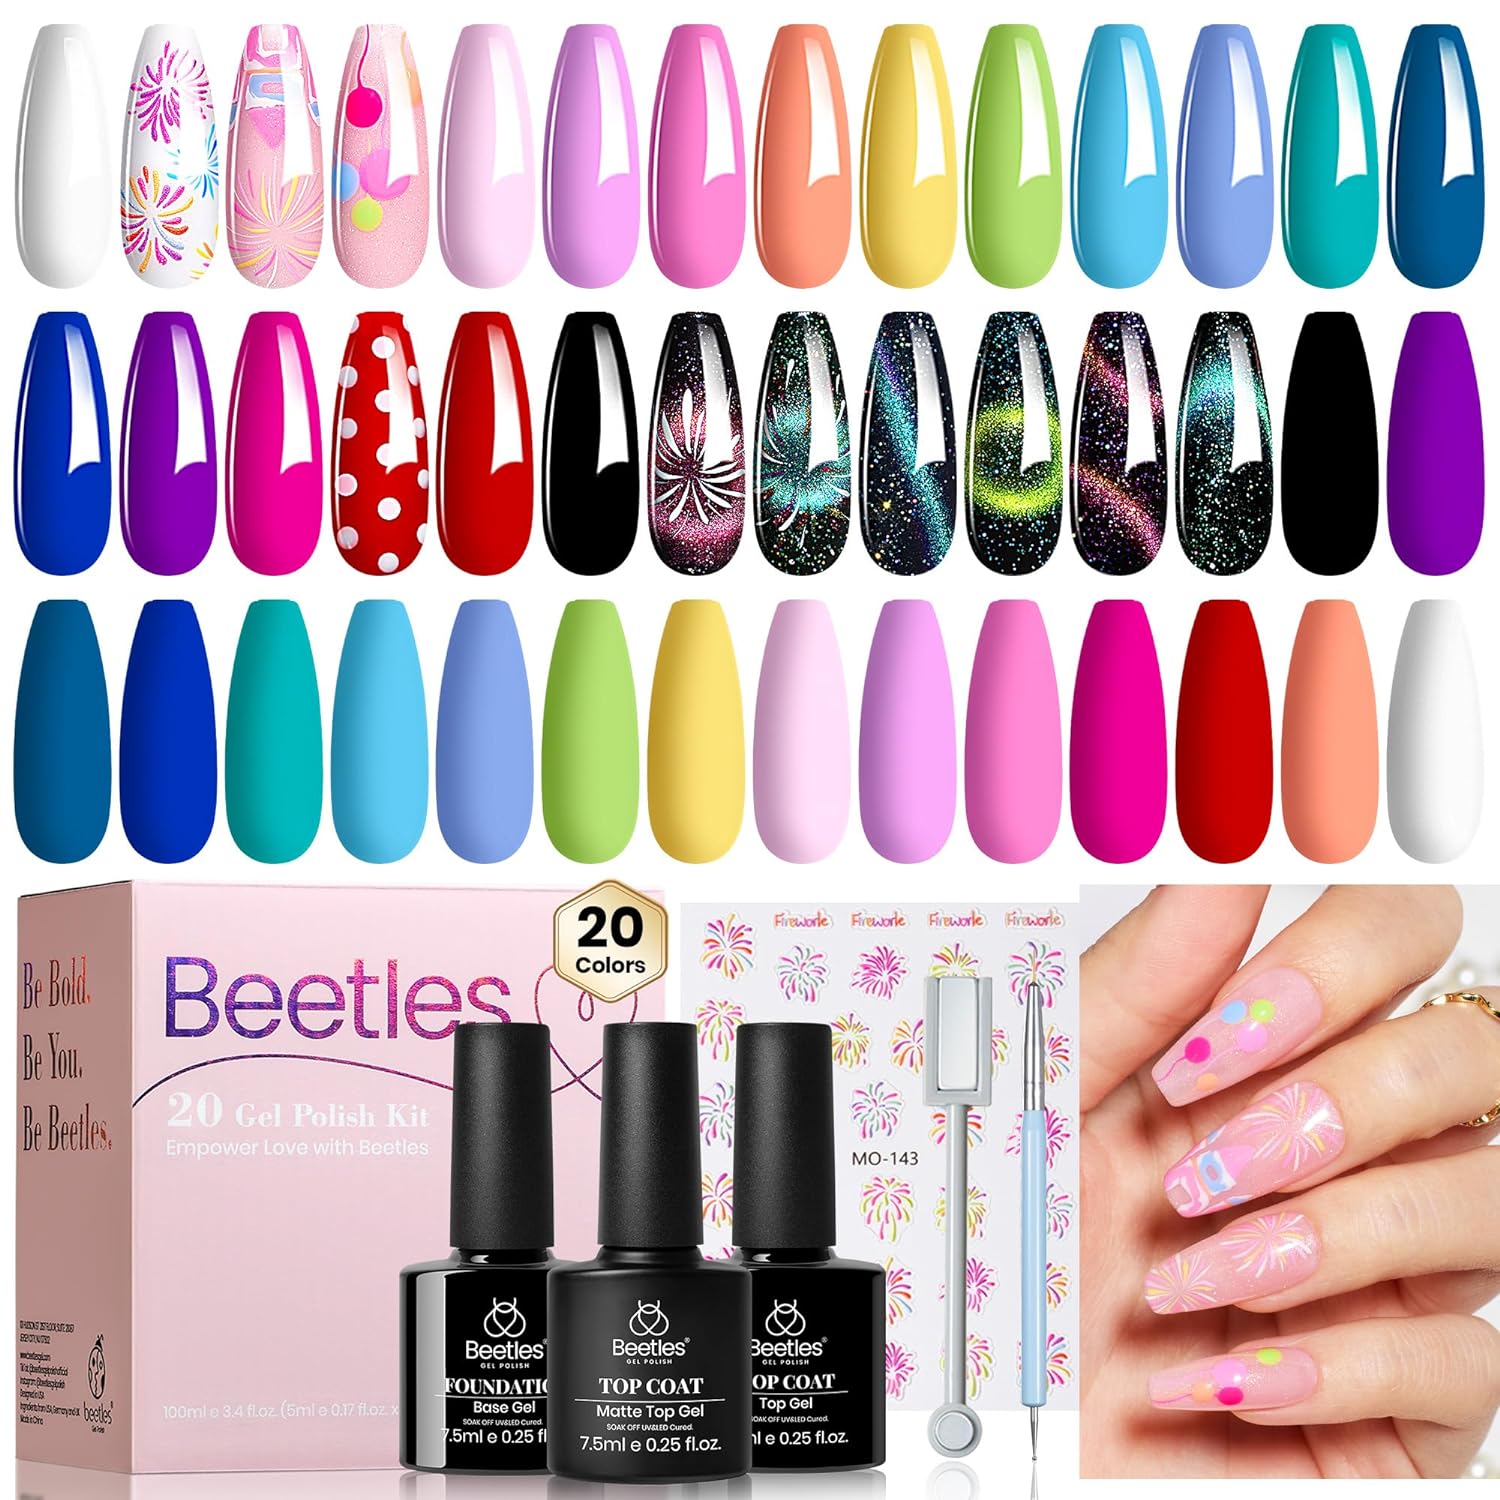 GFSU New Matte Blue & Pink Color Frosted Nail Polish Set BLUE, PINK - Price  in India, Buy GFSU New Matte Blue & Pink Color Frosted Nail Polish Set  BLUE, PINK Online